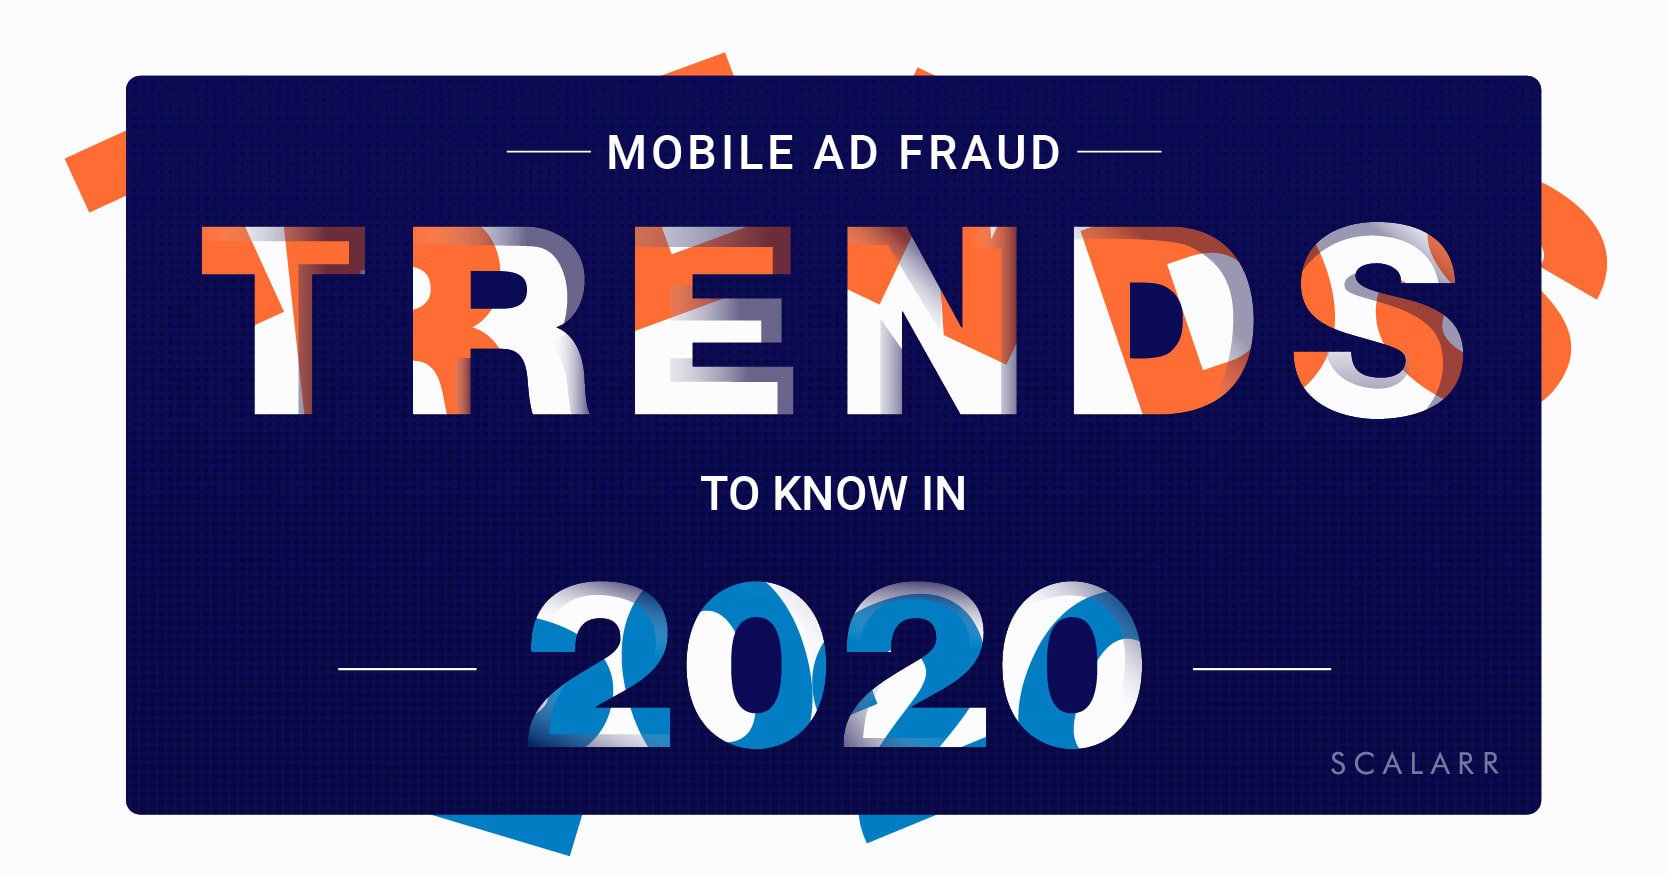 Scalarr_Mobile Ad Fraud Trends to Know in 2020